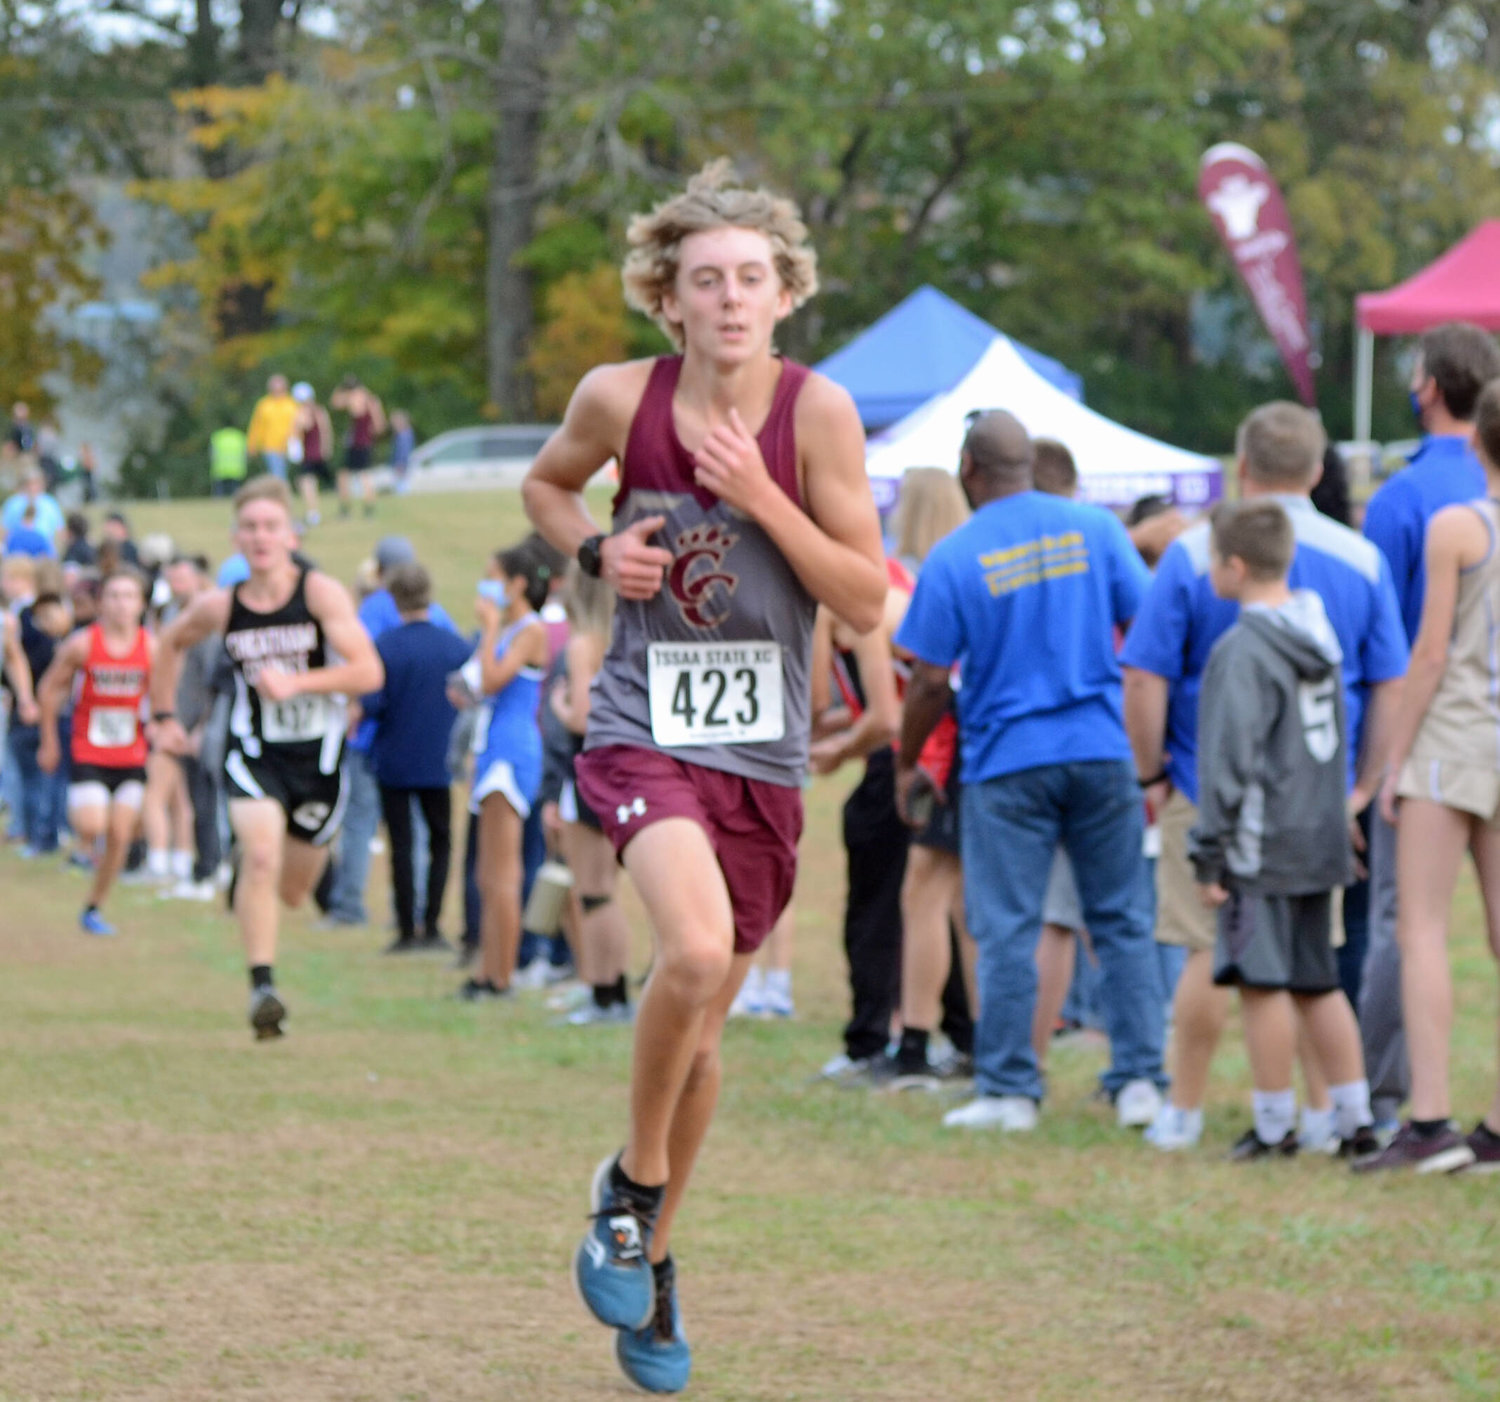 Cornersville senior Eli Hinds finished in 75th place in his final race as a Bulldog.